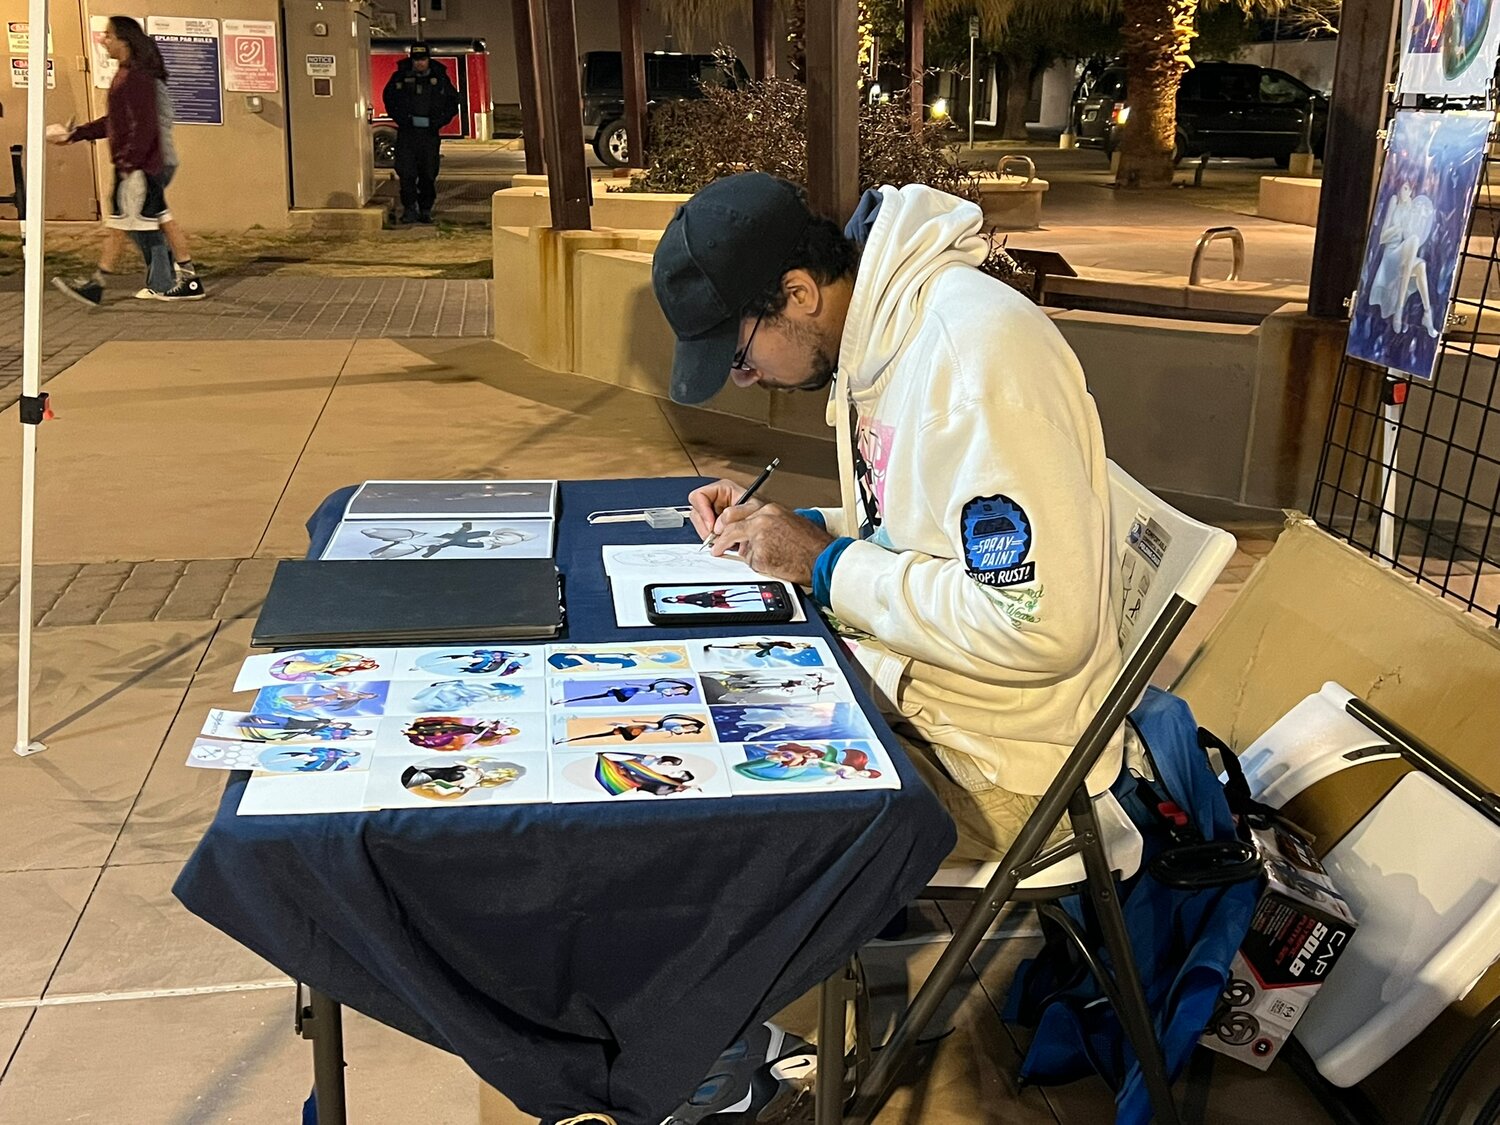 Sean Robinson continues his work on Plaza de Las Cruces during the Arts Flea Market evening event Friday, Feb. 2 during the kick-off arts crawl For the Love of Art month. Visit artformsnm.org for more information about special events taking place all month.